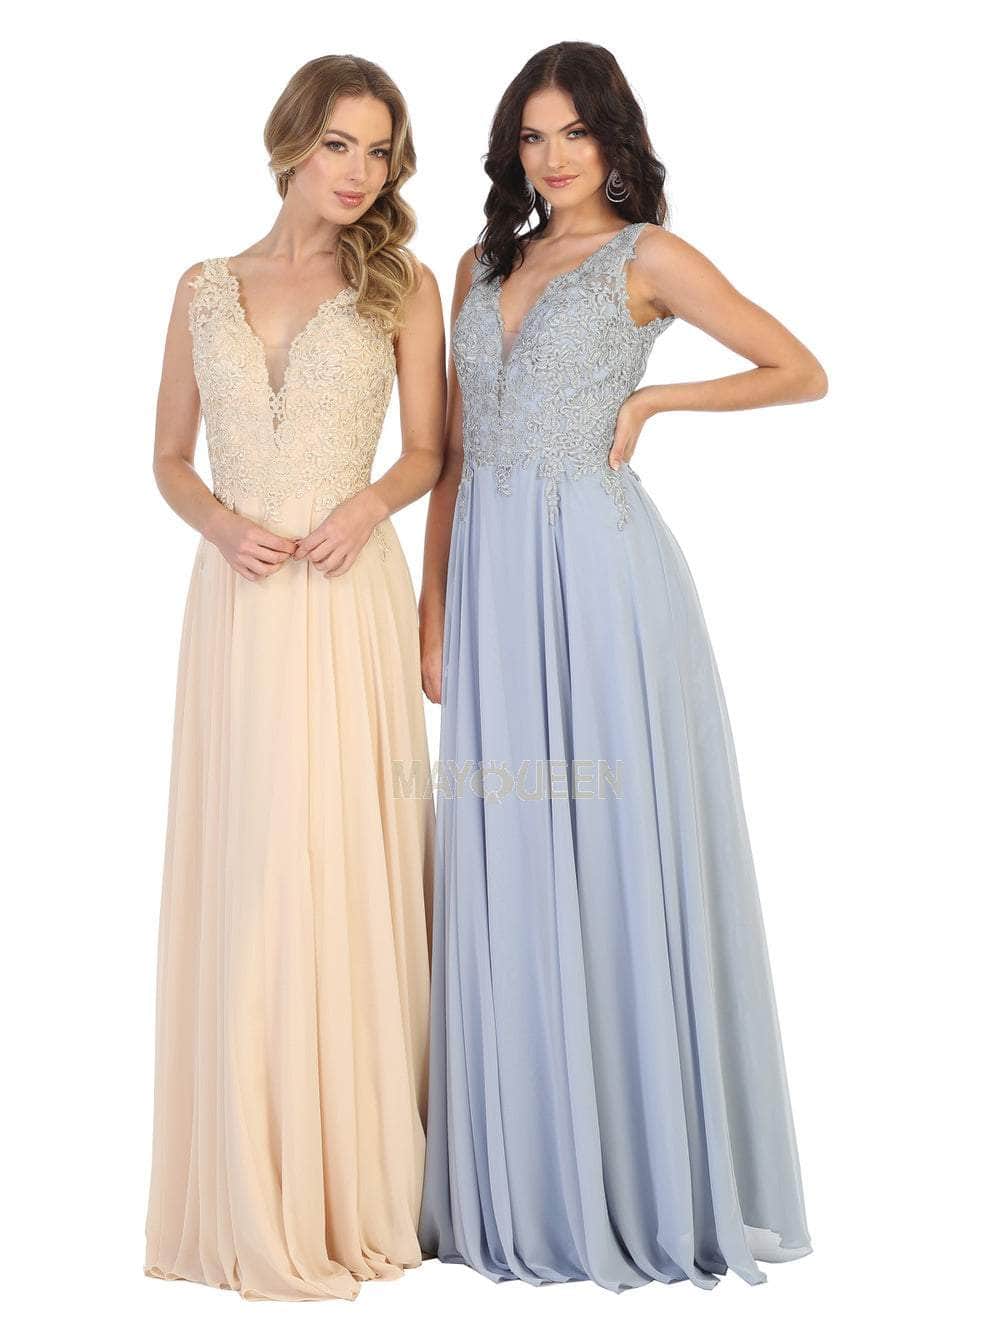 May Queen MQ1754B - Laced A-Line Evening Dress Special Occasion Dress